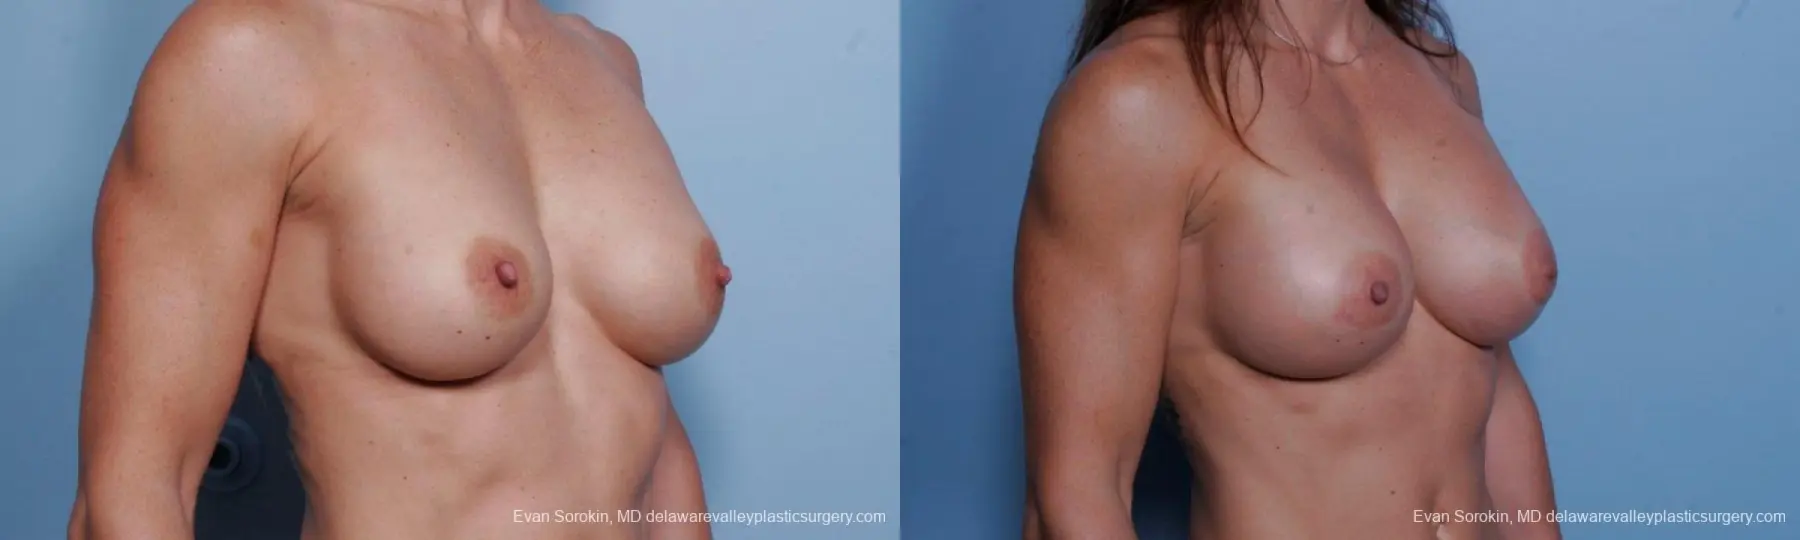 Philadelphia Breast Augmentation 9455 - Before and After 2